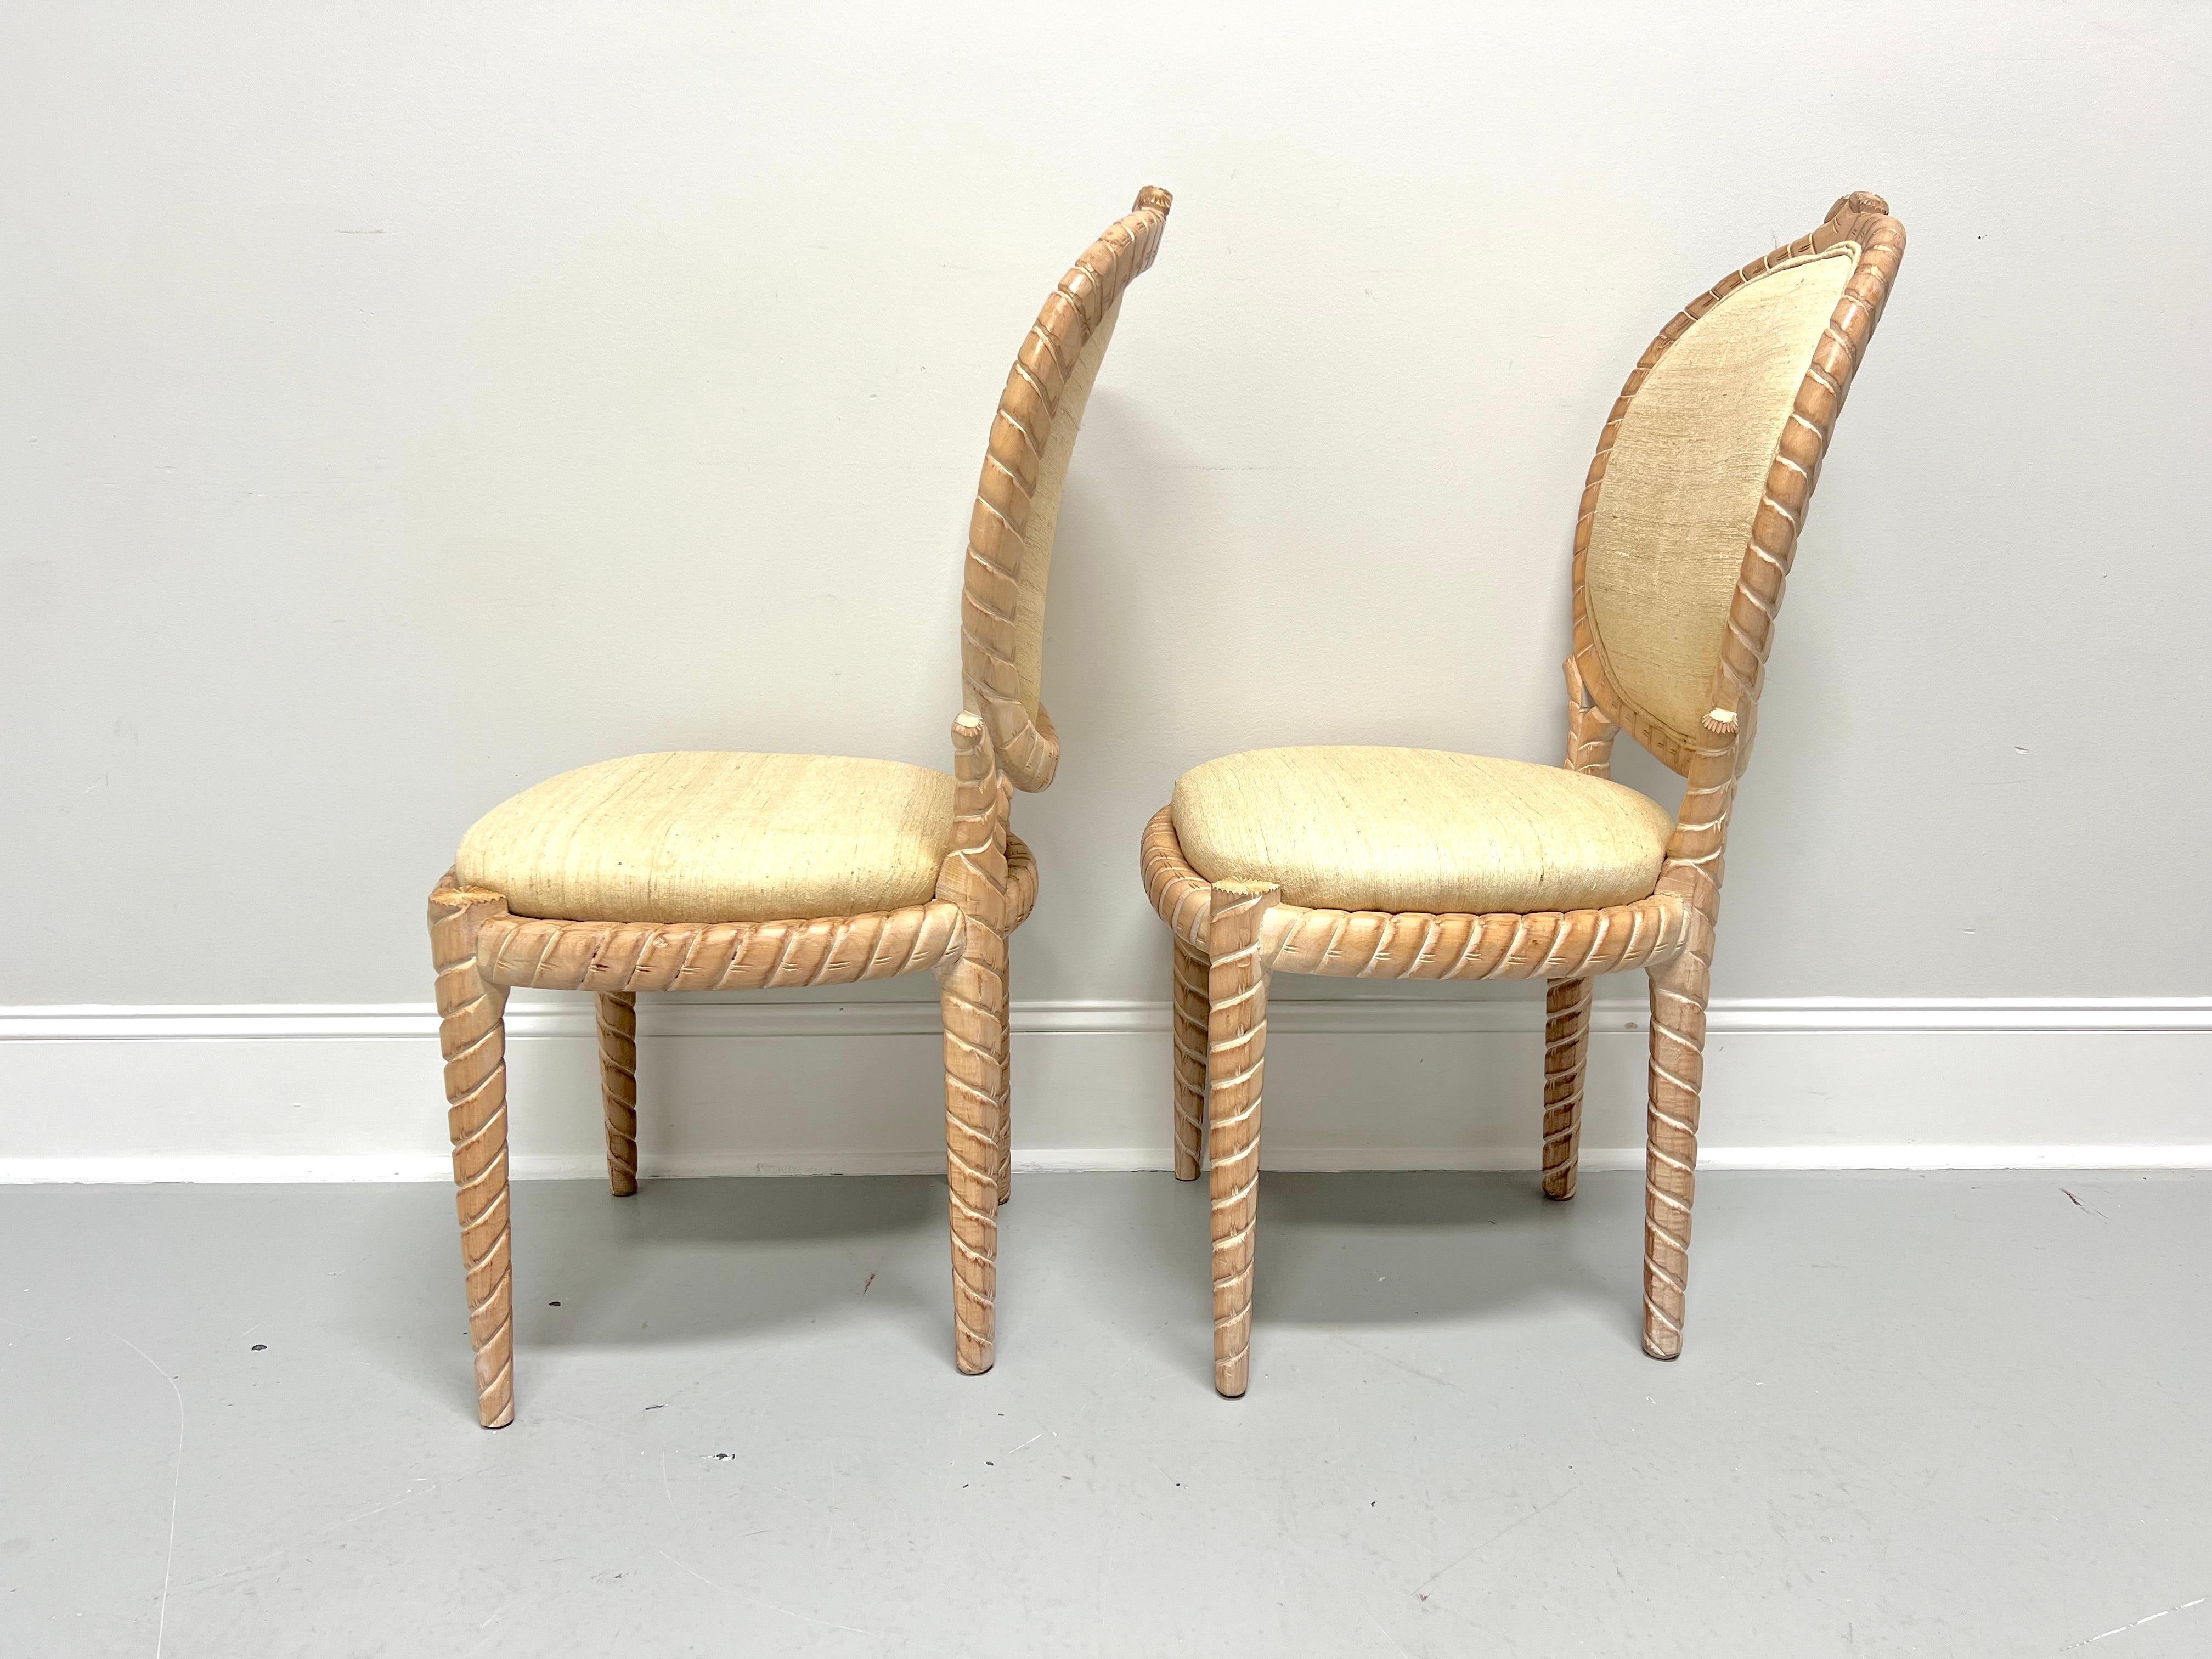 1980's Carved Whitewashed Wood Boho Rope Twist Dining Side Chairs - Pair B In Good Condition For Sale In Charlotte, NC